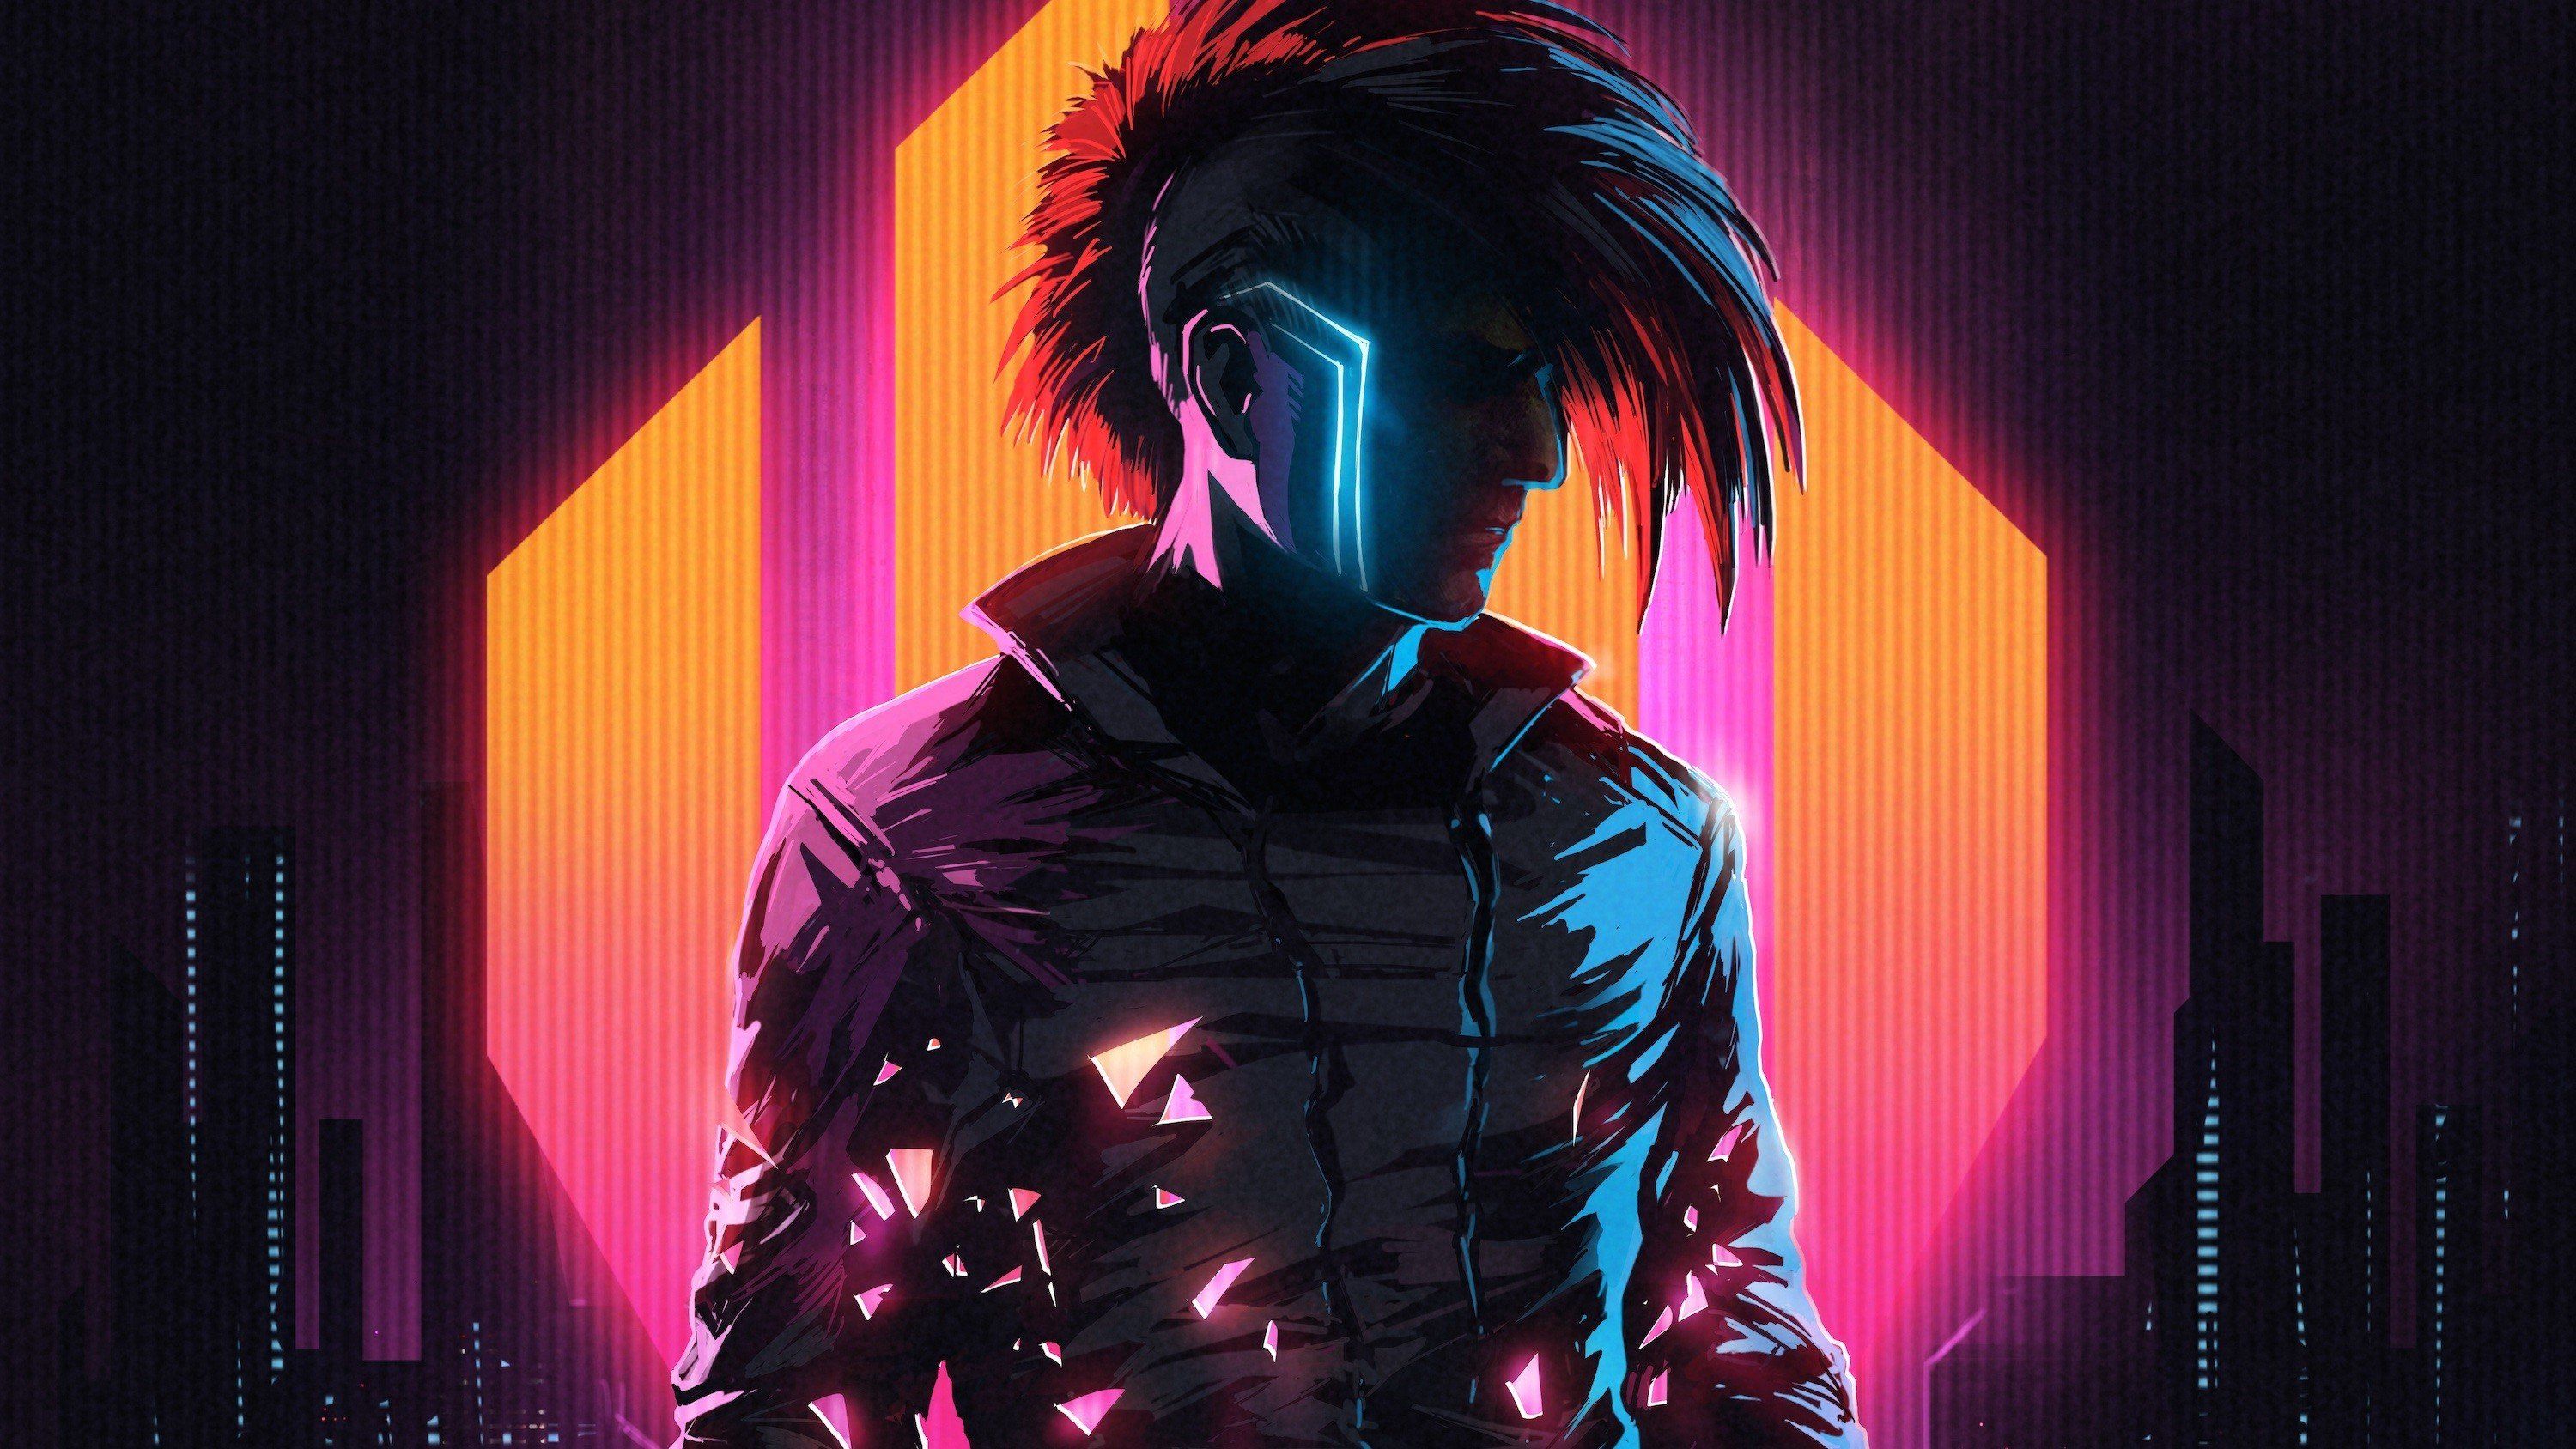 Anime Boy In Cyberpunk World Wallpaper,HD Anime Wallpapers,4k Wallpapers ,Images,Backgrounds,Photos and Pictures